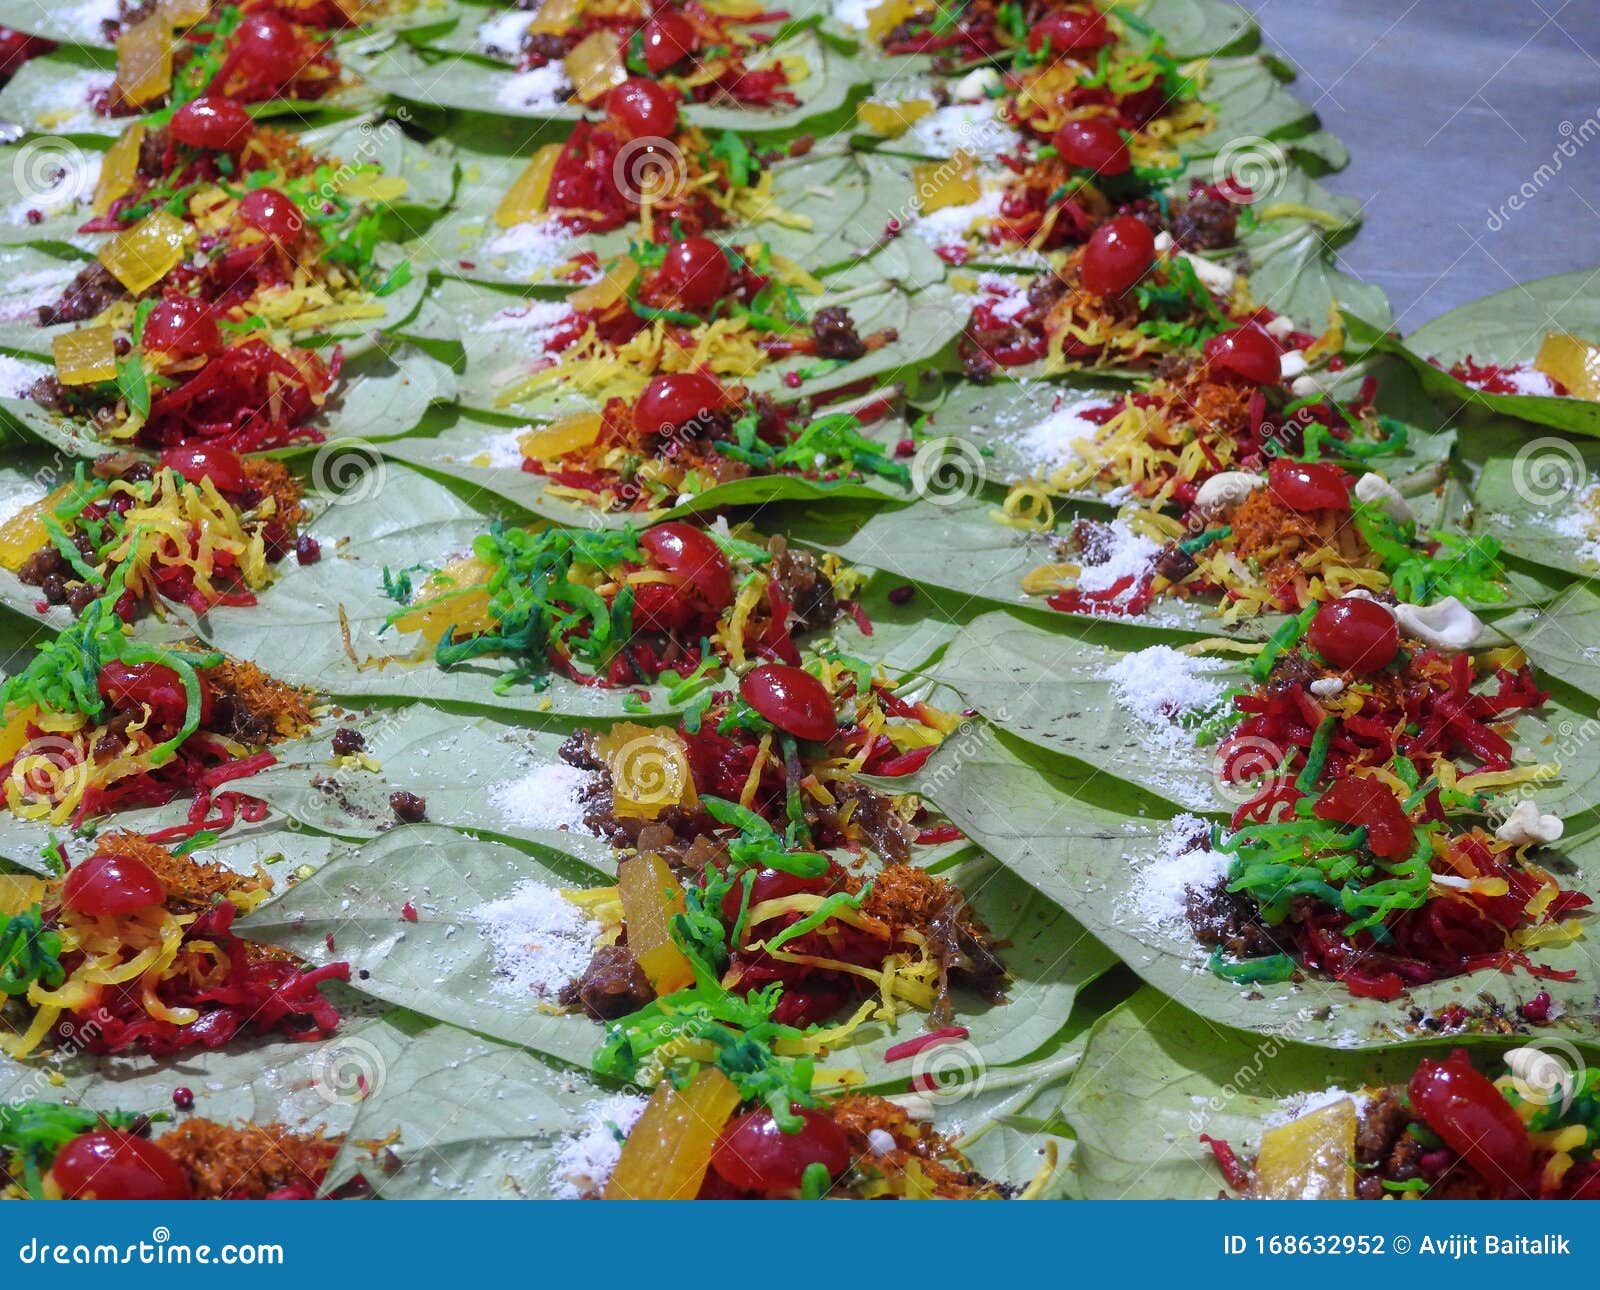 banarasi paan or betel leaf garnished with betel nut and all indian colorful banarasi ingredients for sale